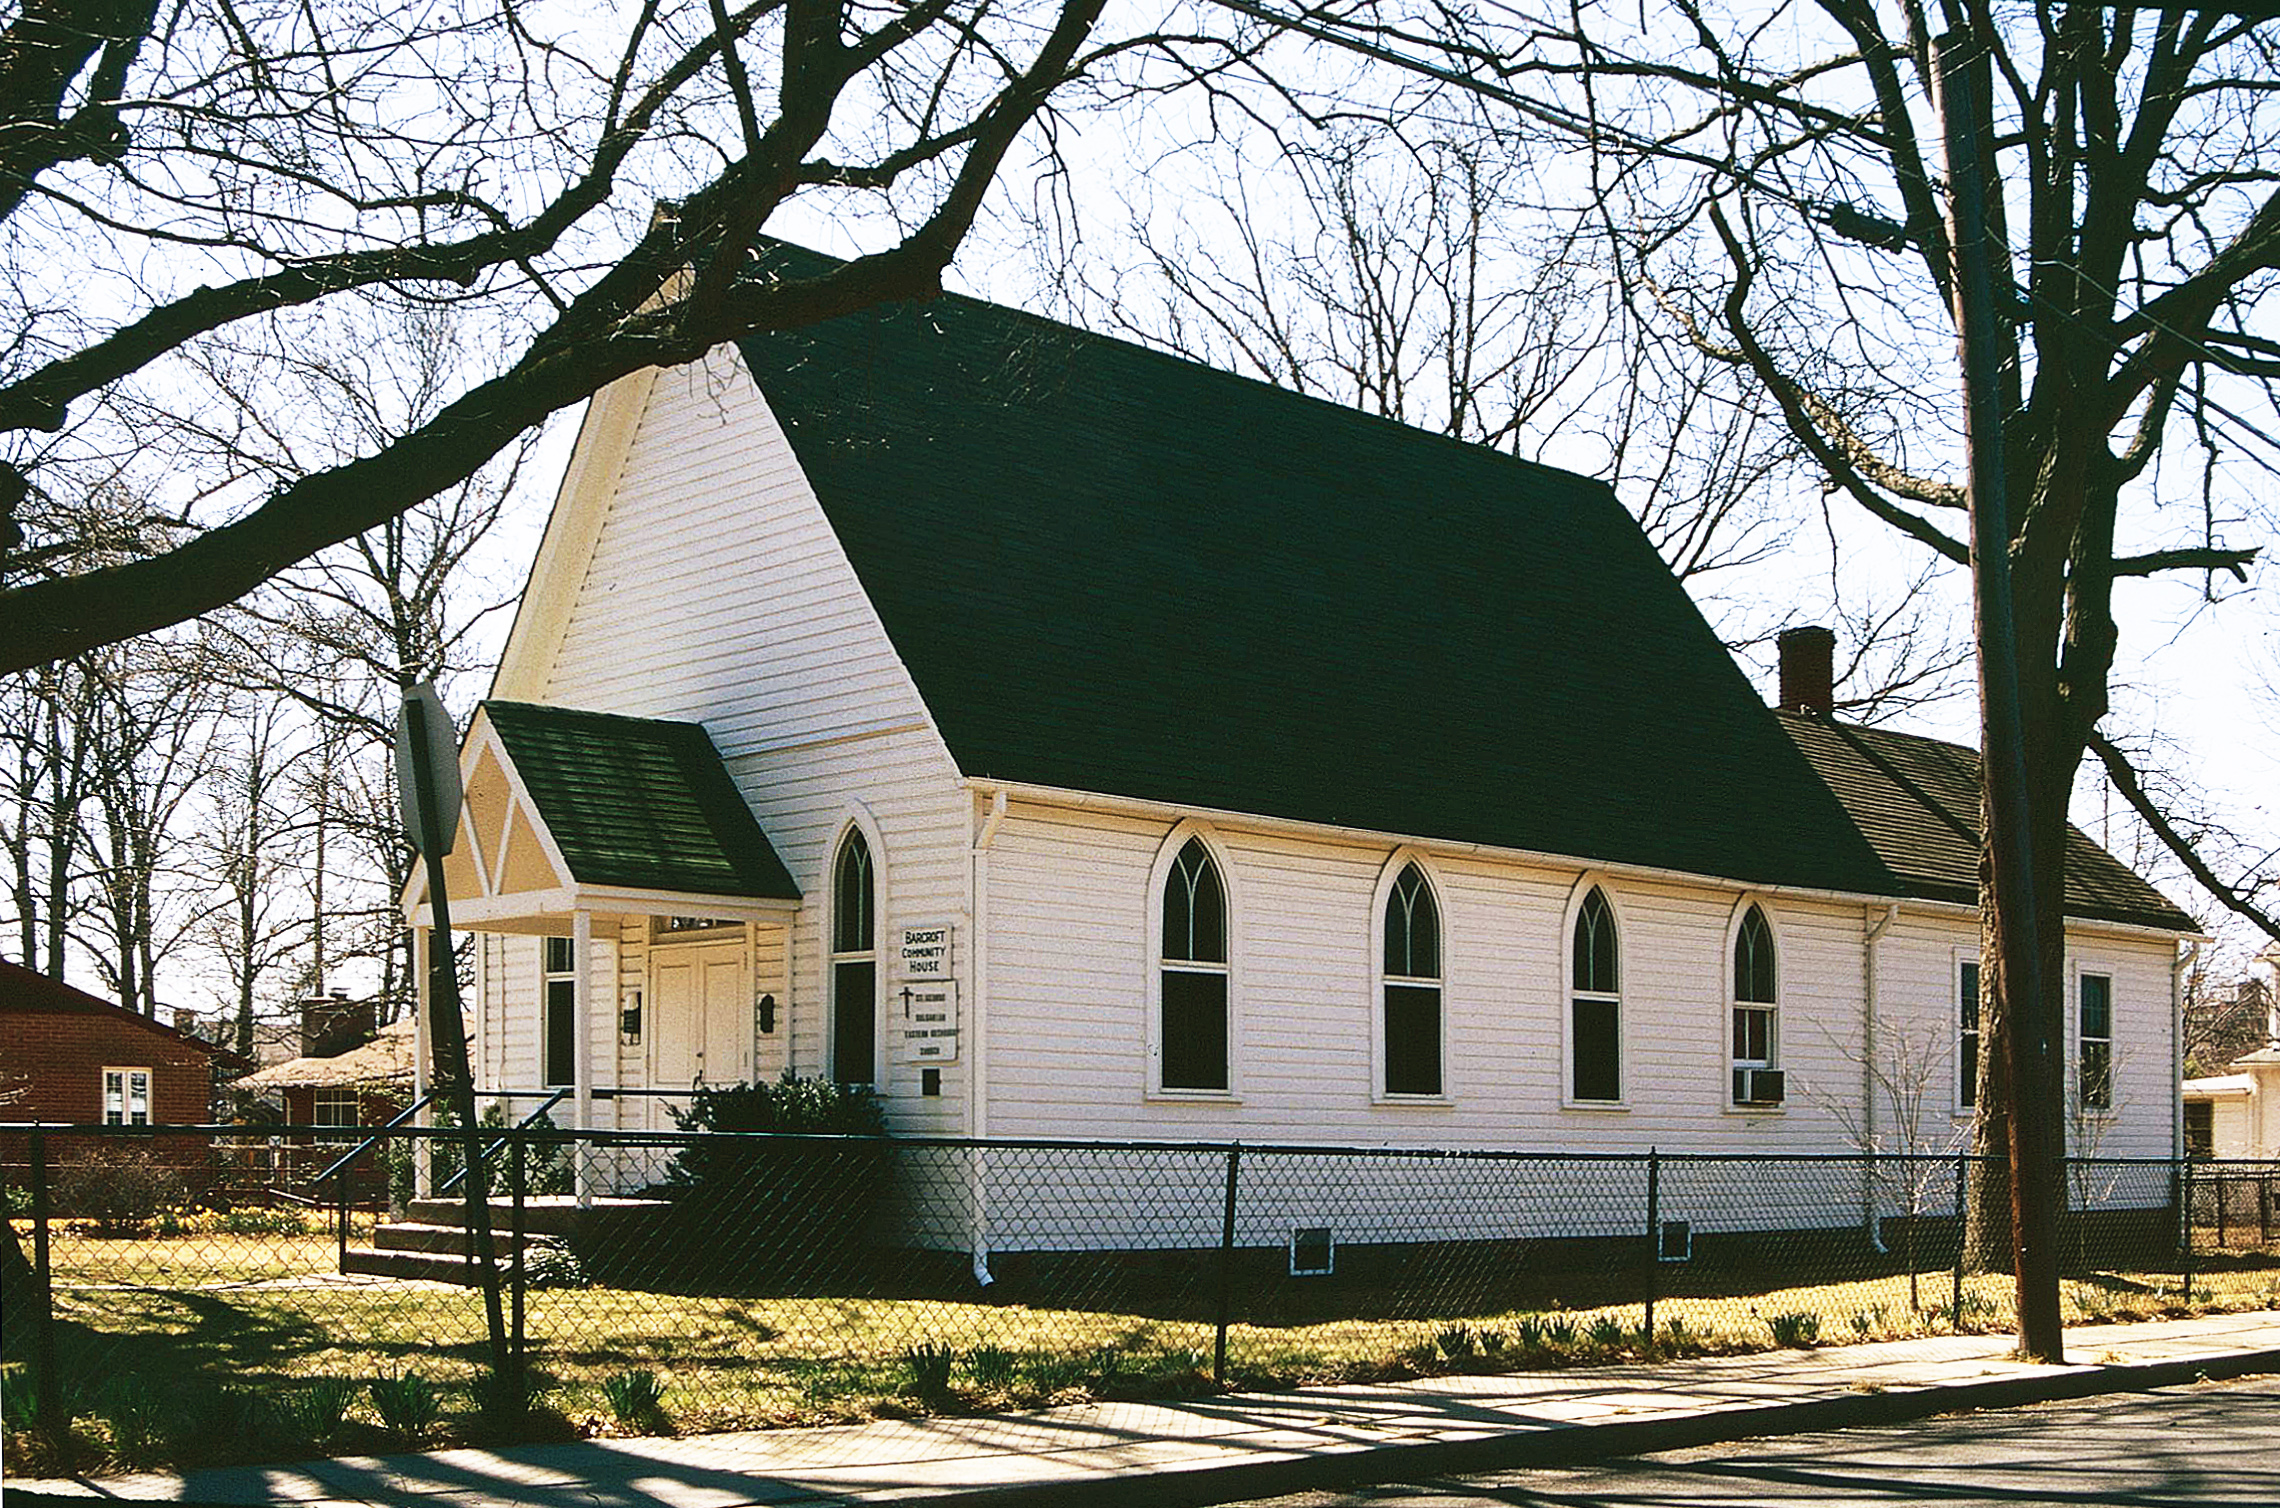 000-0040_Barcroft-Comm_House_1995_ext_side_view_VLR_Online